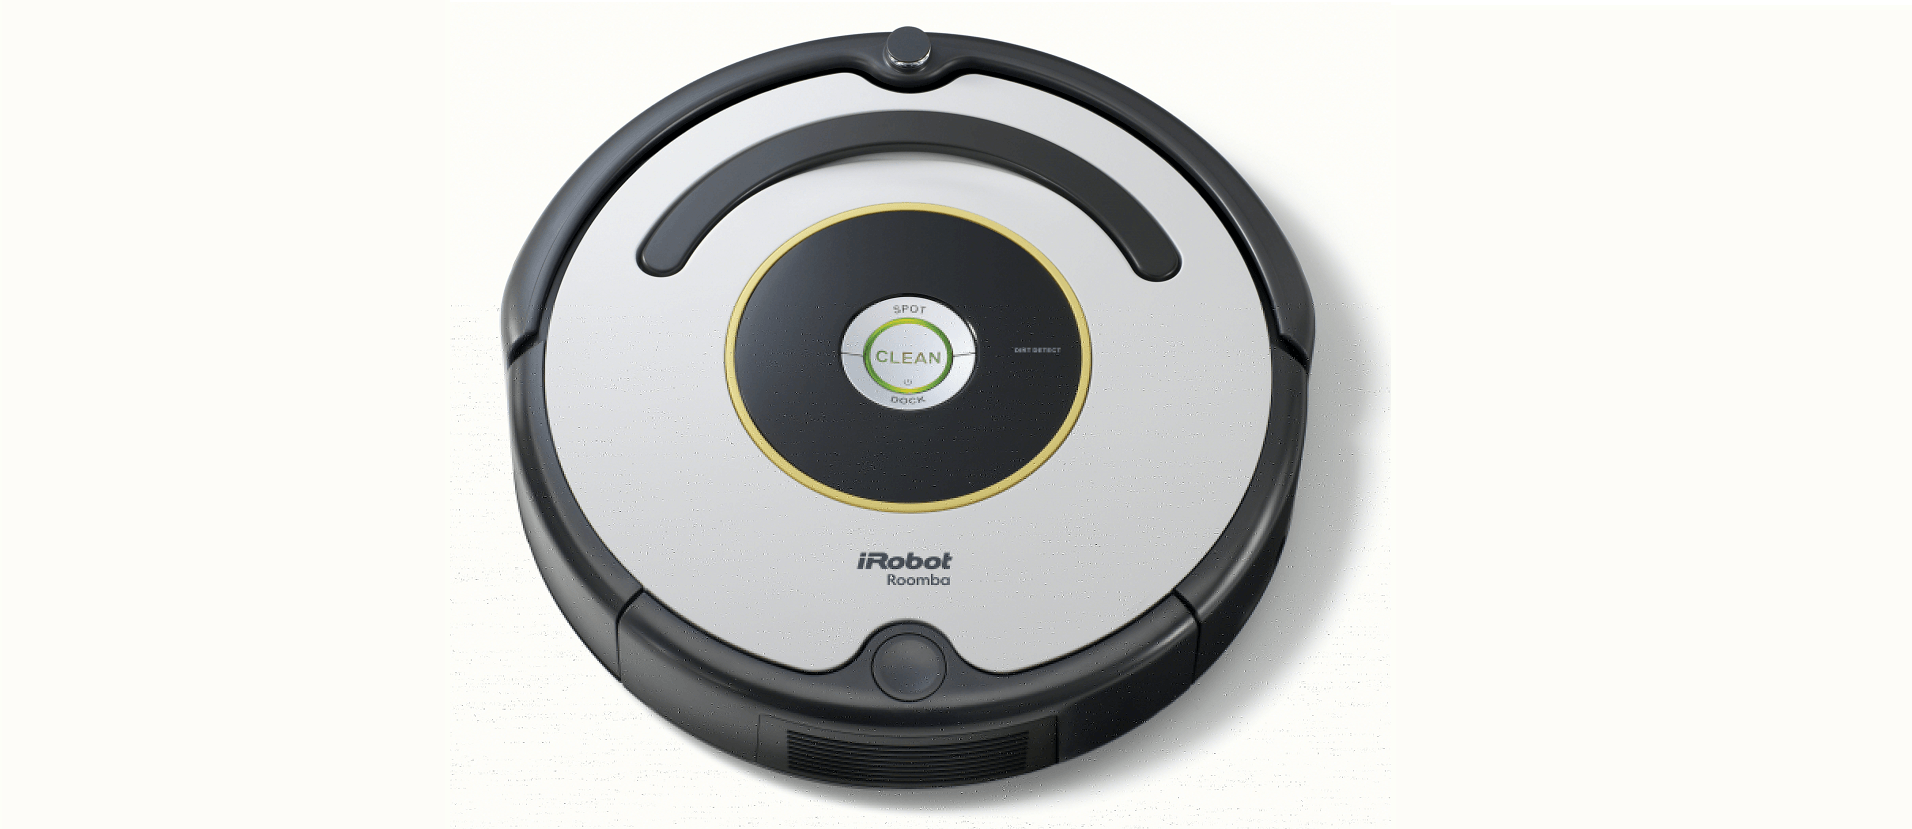 Roomba 620 Review - Simple Robot, Simple Clean